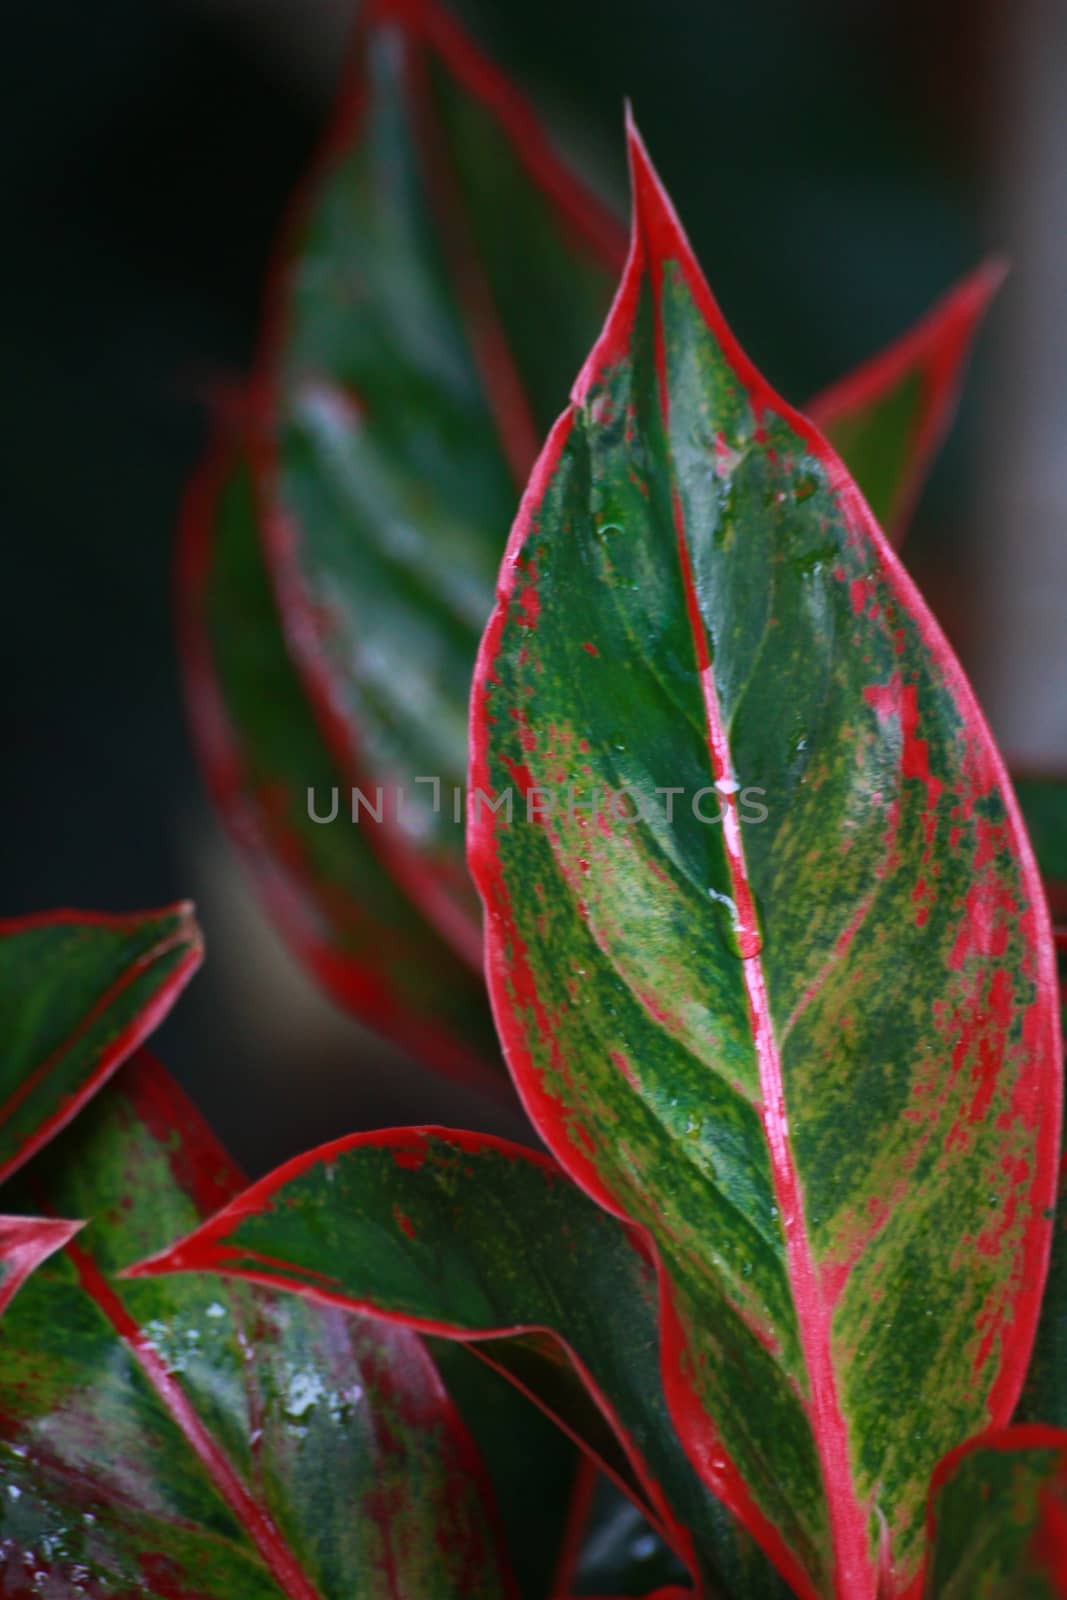 Aglaonema is a genus of decorative plants with beautiful leaves. Known as the king of ornamental is a plant with more than 1 sequence 40 type. There are currently improving creative relationship to paint the beautiful popular culture for beauty, and the sacred wood.
